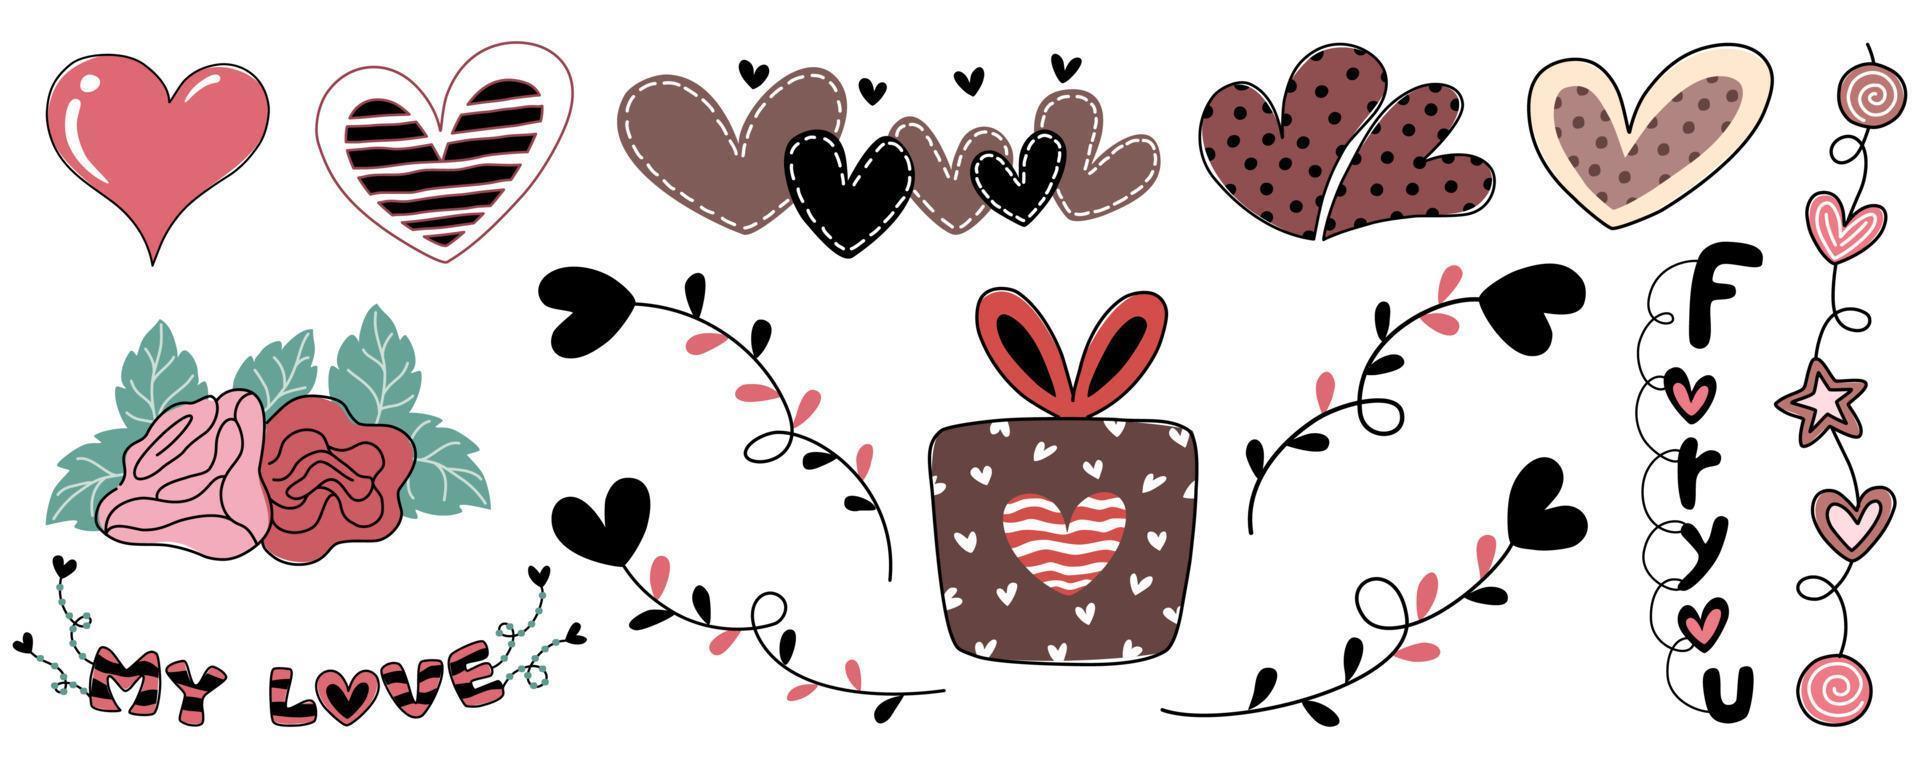 Vector illustration set valentine element designed in doodle style On white background for valentine's day themed decoration, digital printing, card design, sticker, gift and more.